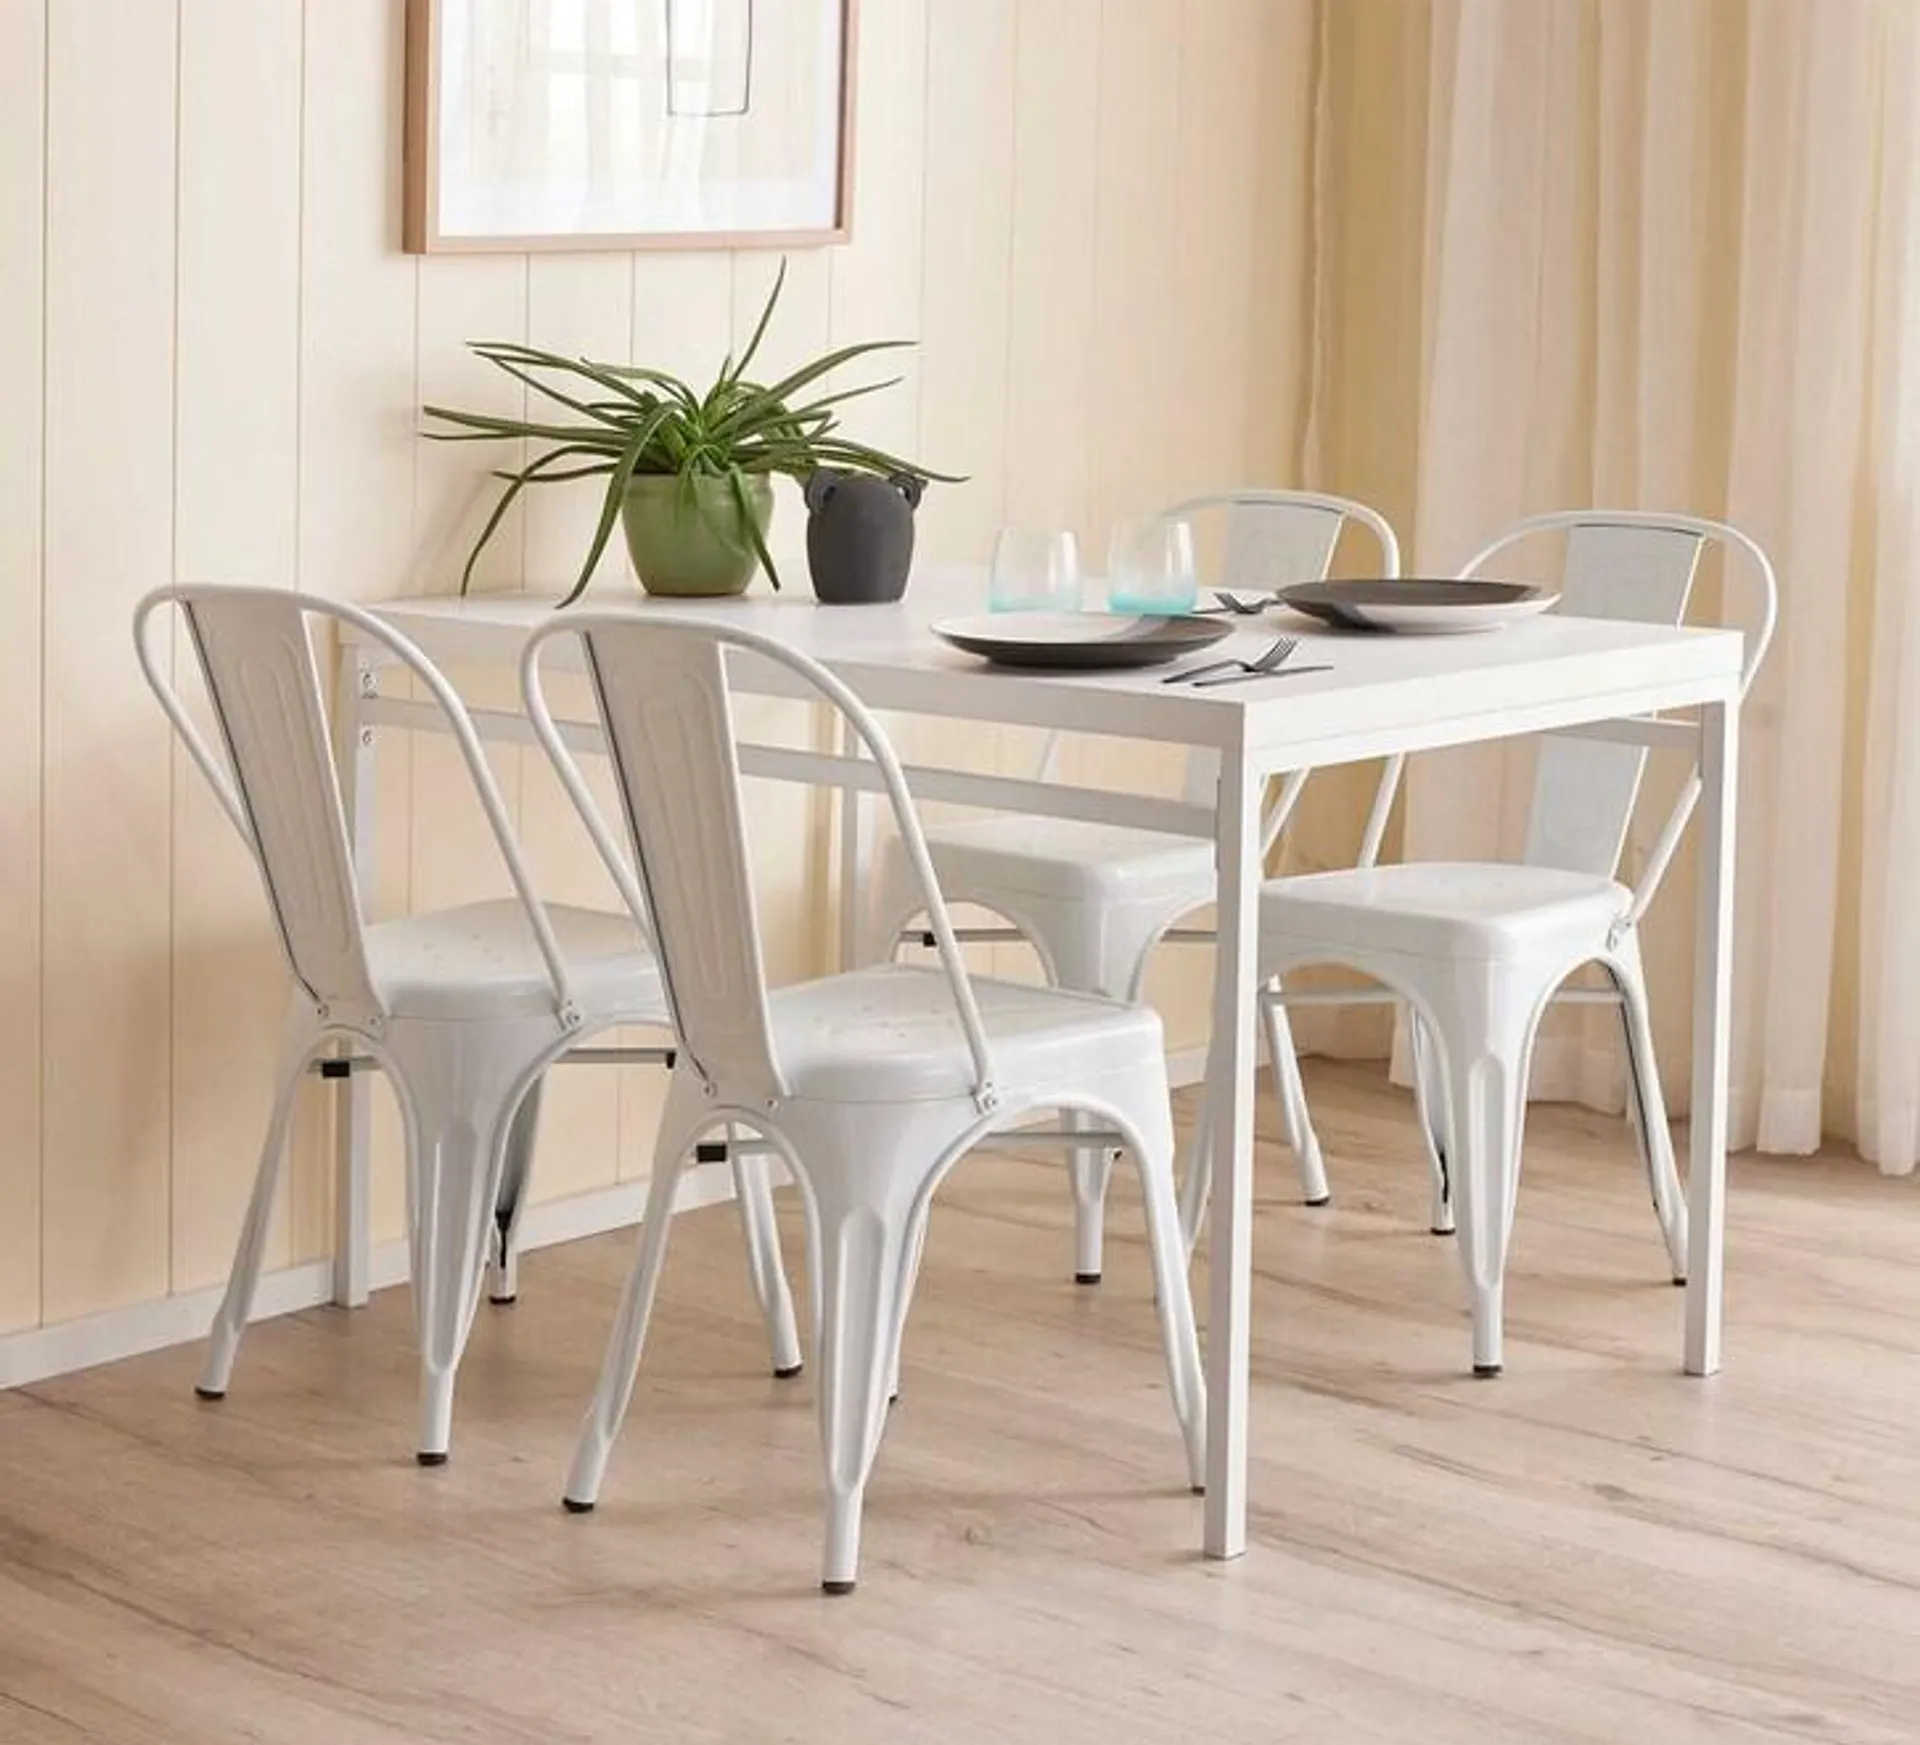 Oslo 4 Seater Dining Table